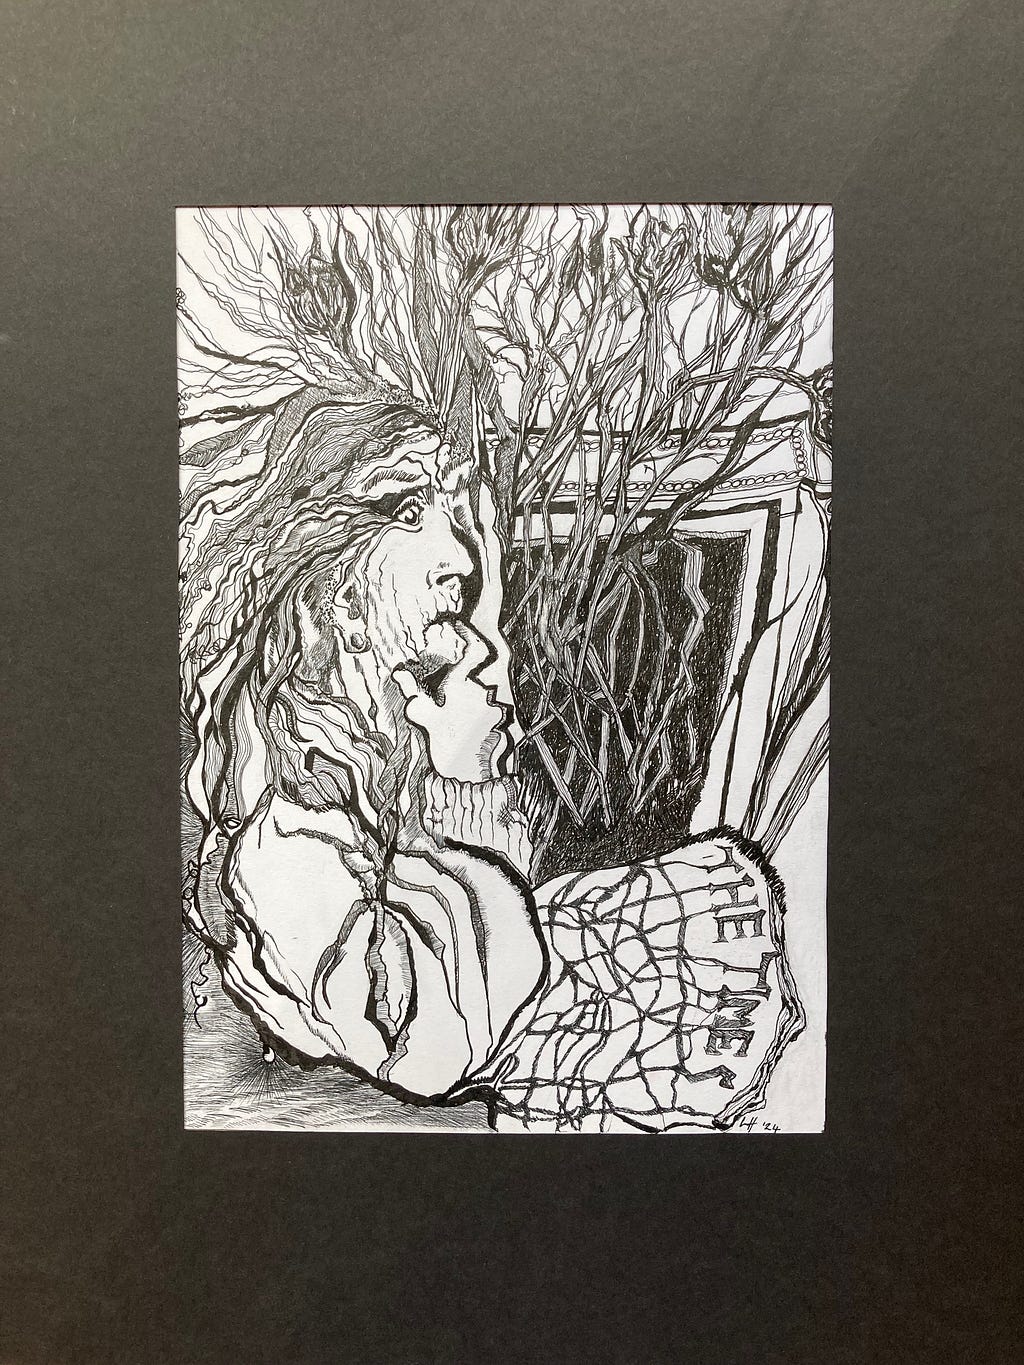 An ink drawing of an old woman staring out of a window, although we don’t see the window. Her hand holds her chin in a contemplative manner. The image is highly stylized with foliage coming out of the fireplace next to her — somewhat indistinguishable, or at least conjoined with her wild hair and parts of her body.